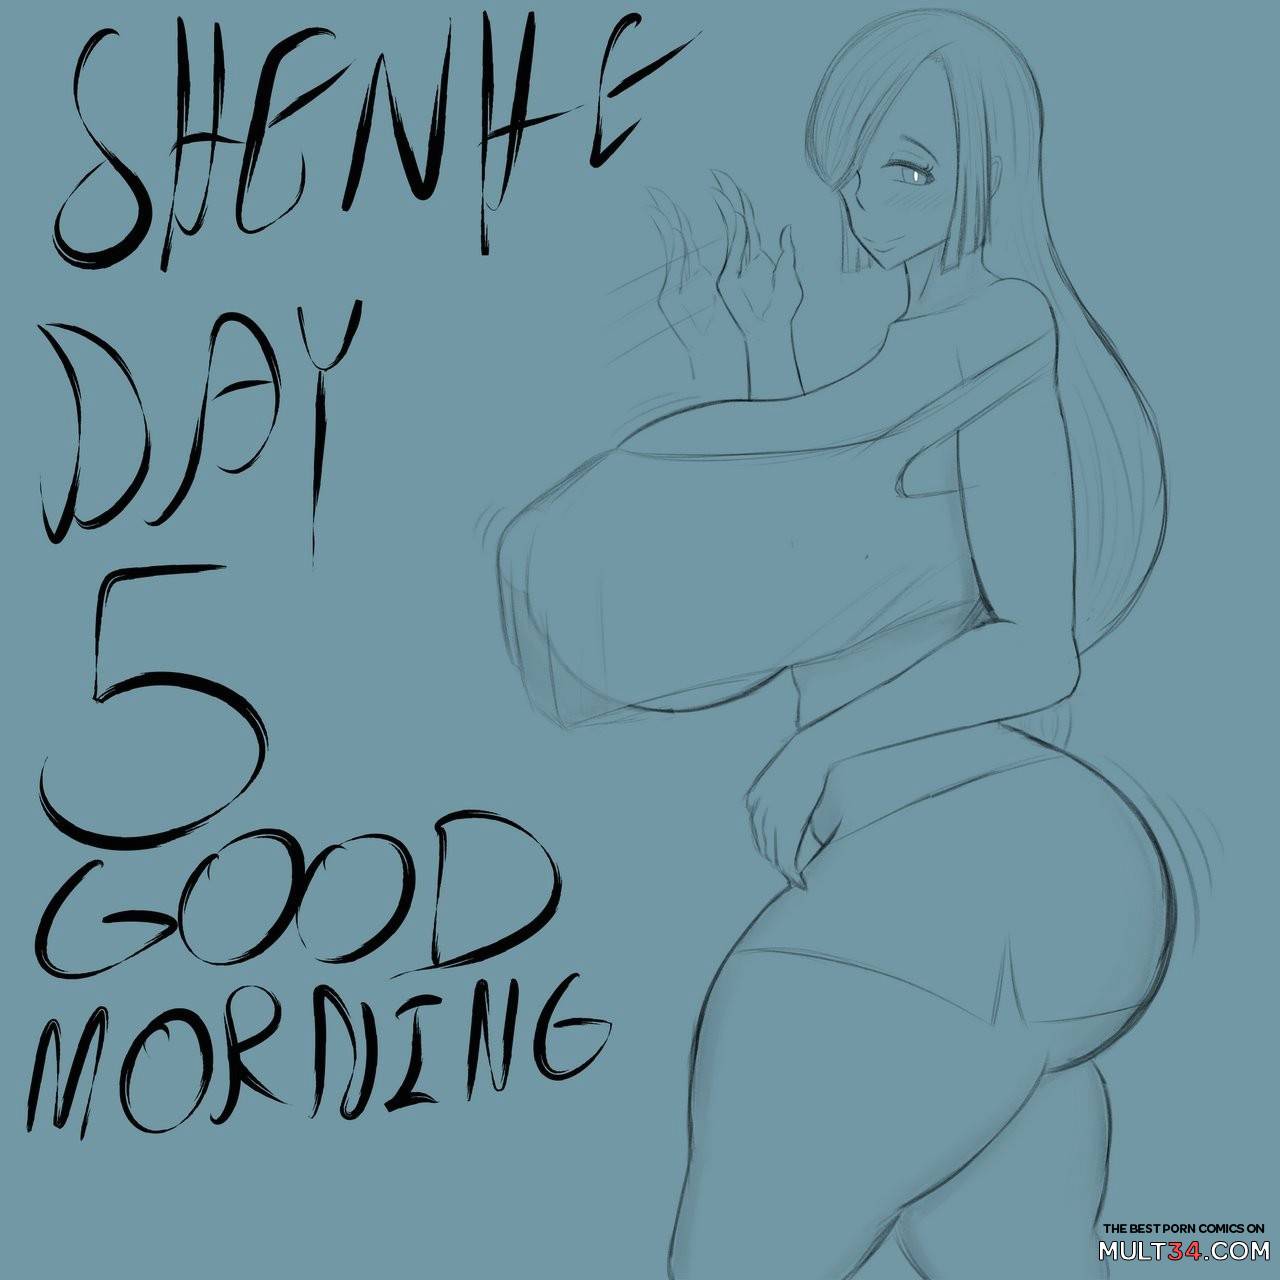 Shenhe Daily Doodles page 5